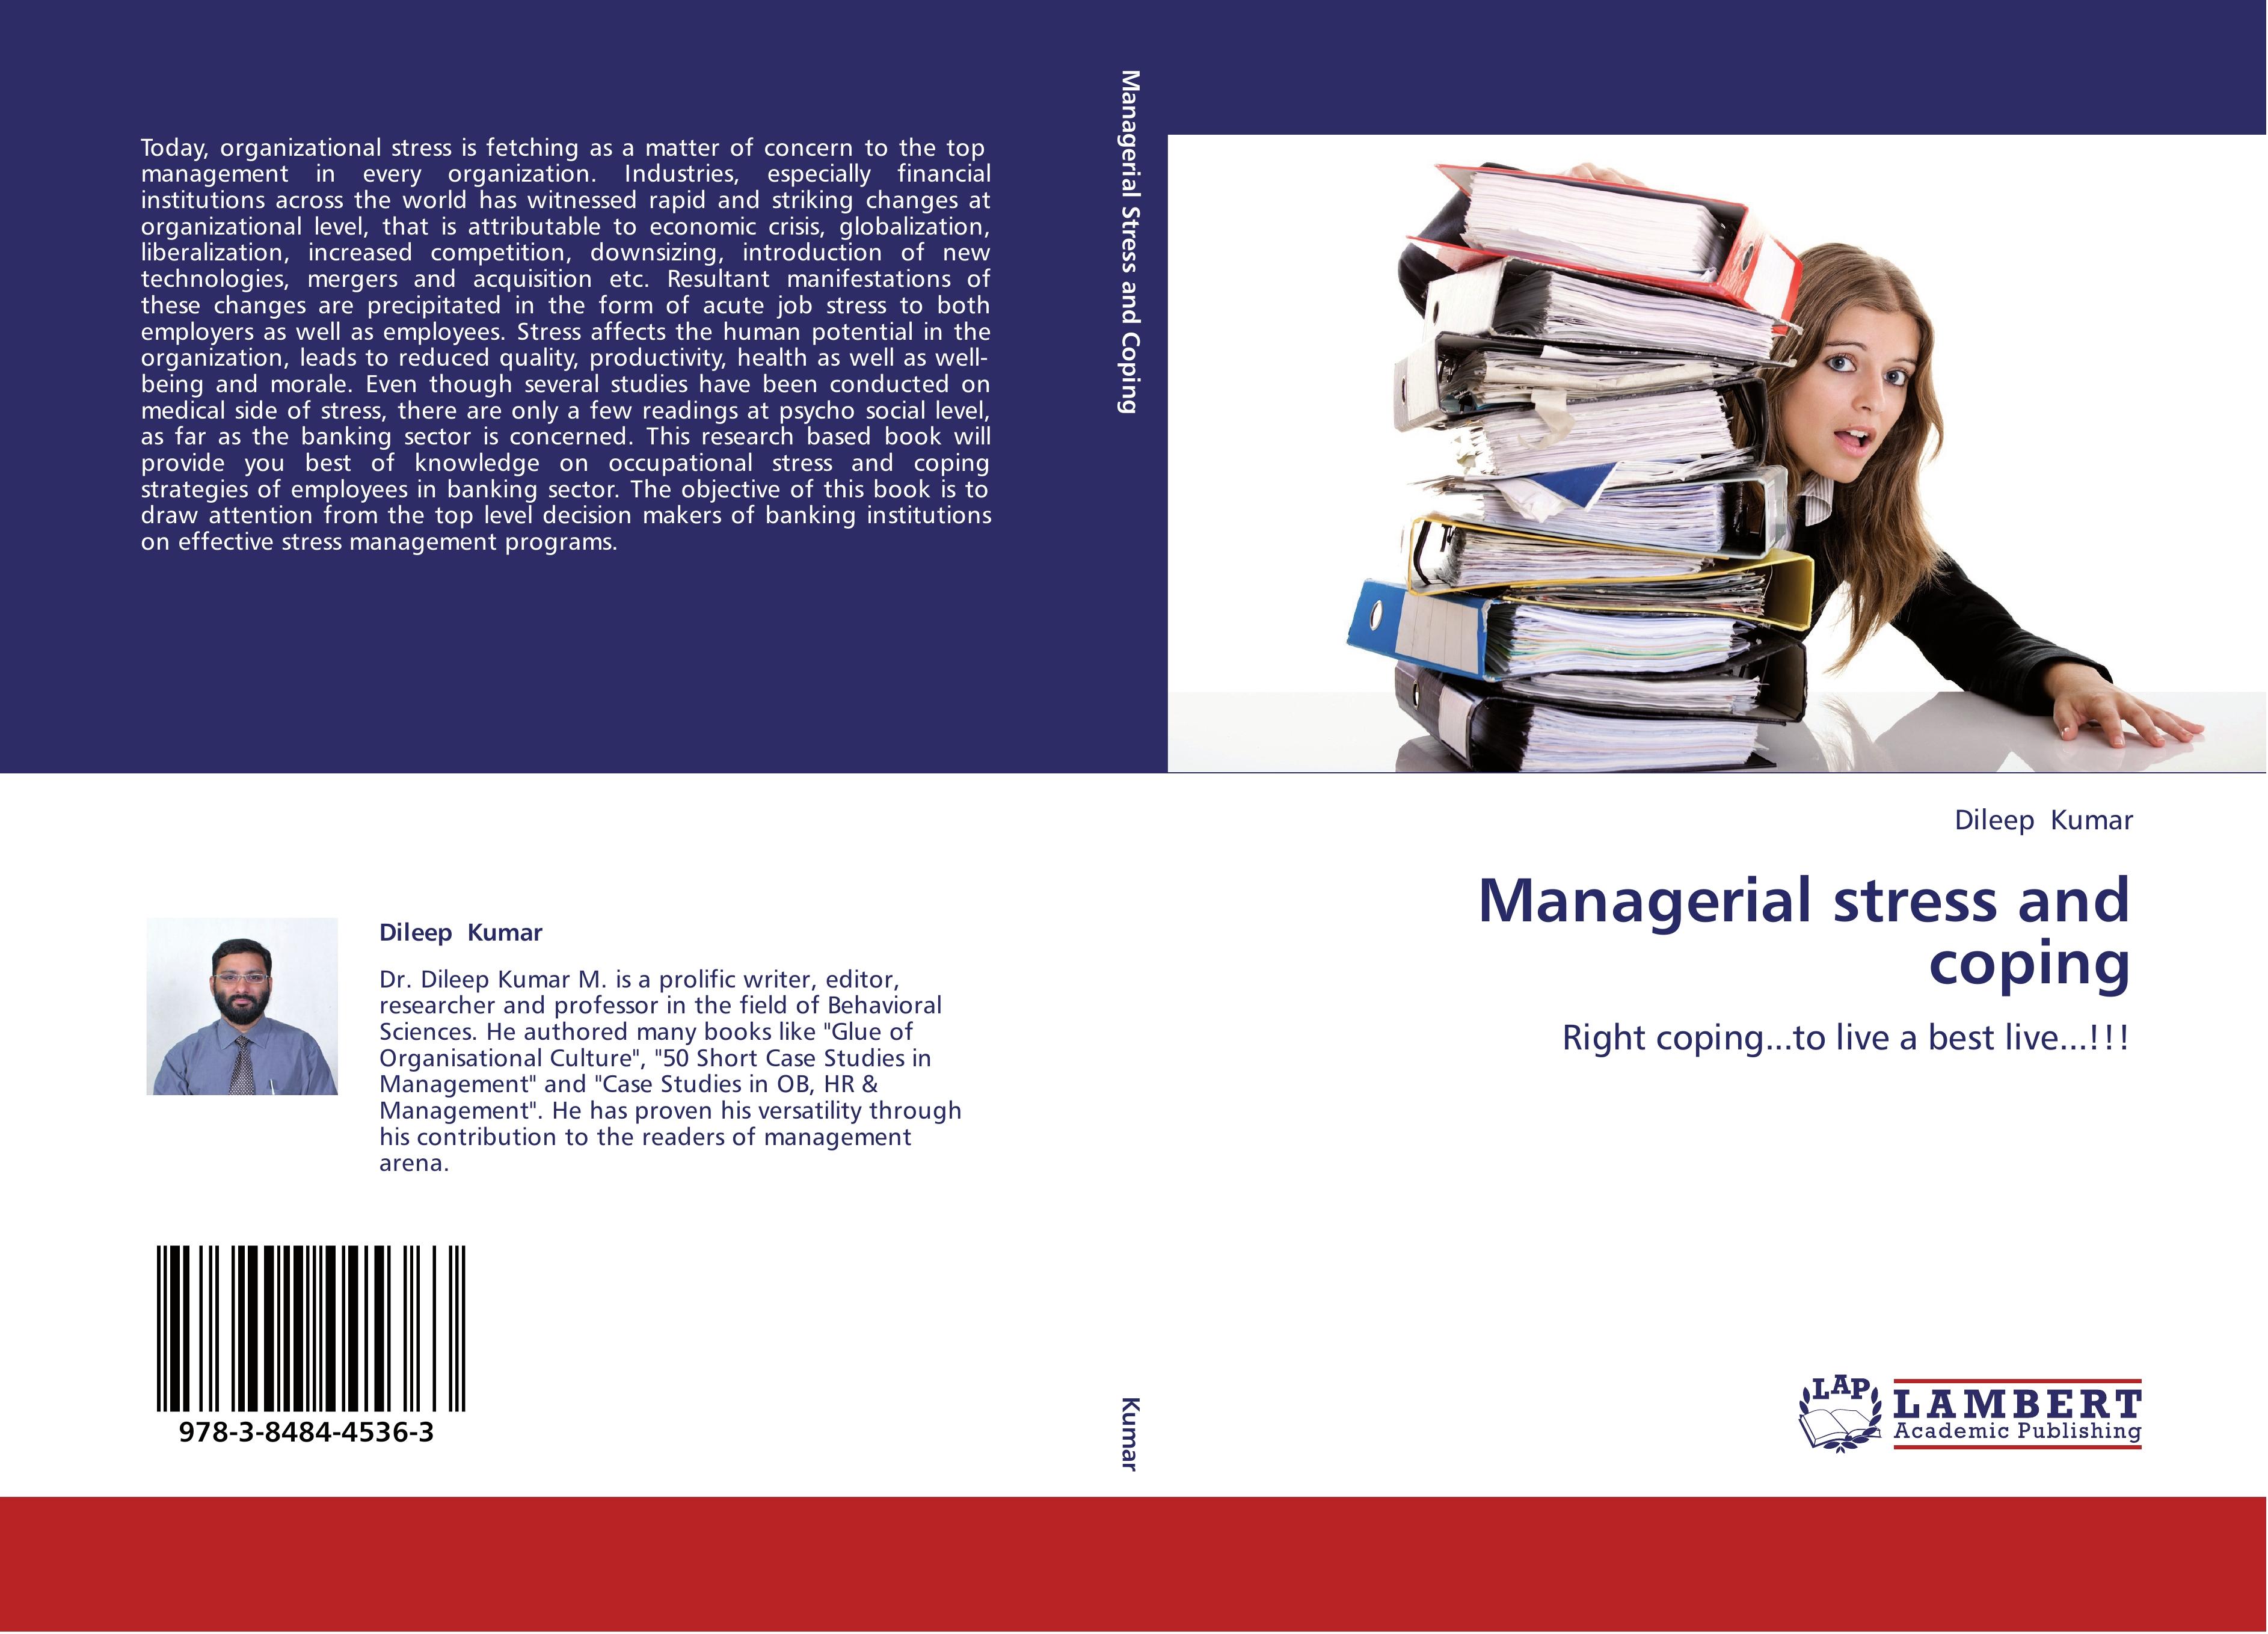 Managerial stress and coping / Right coping...to live a best live...!!! / Dileep Kumar / Taschenbuch / Paperback / 156 S. / Englisch / 2012 / LAP LAMBERT Academic Publishing / EAN 9783848445363 - Kumar, Dileep